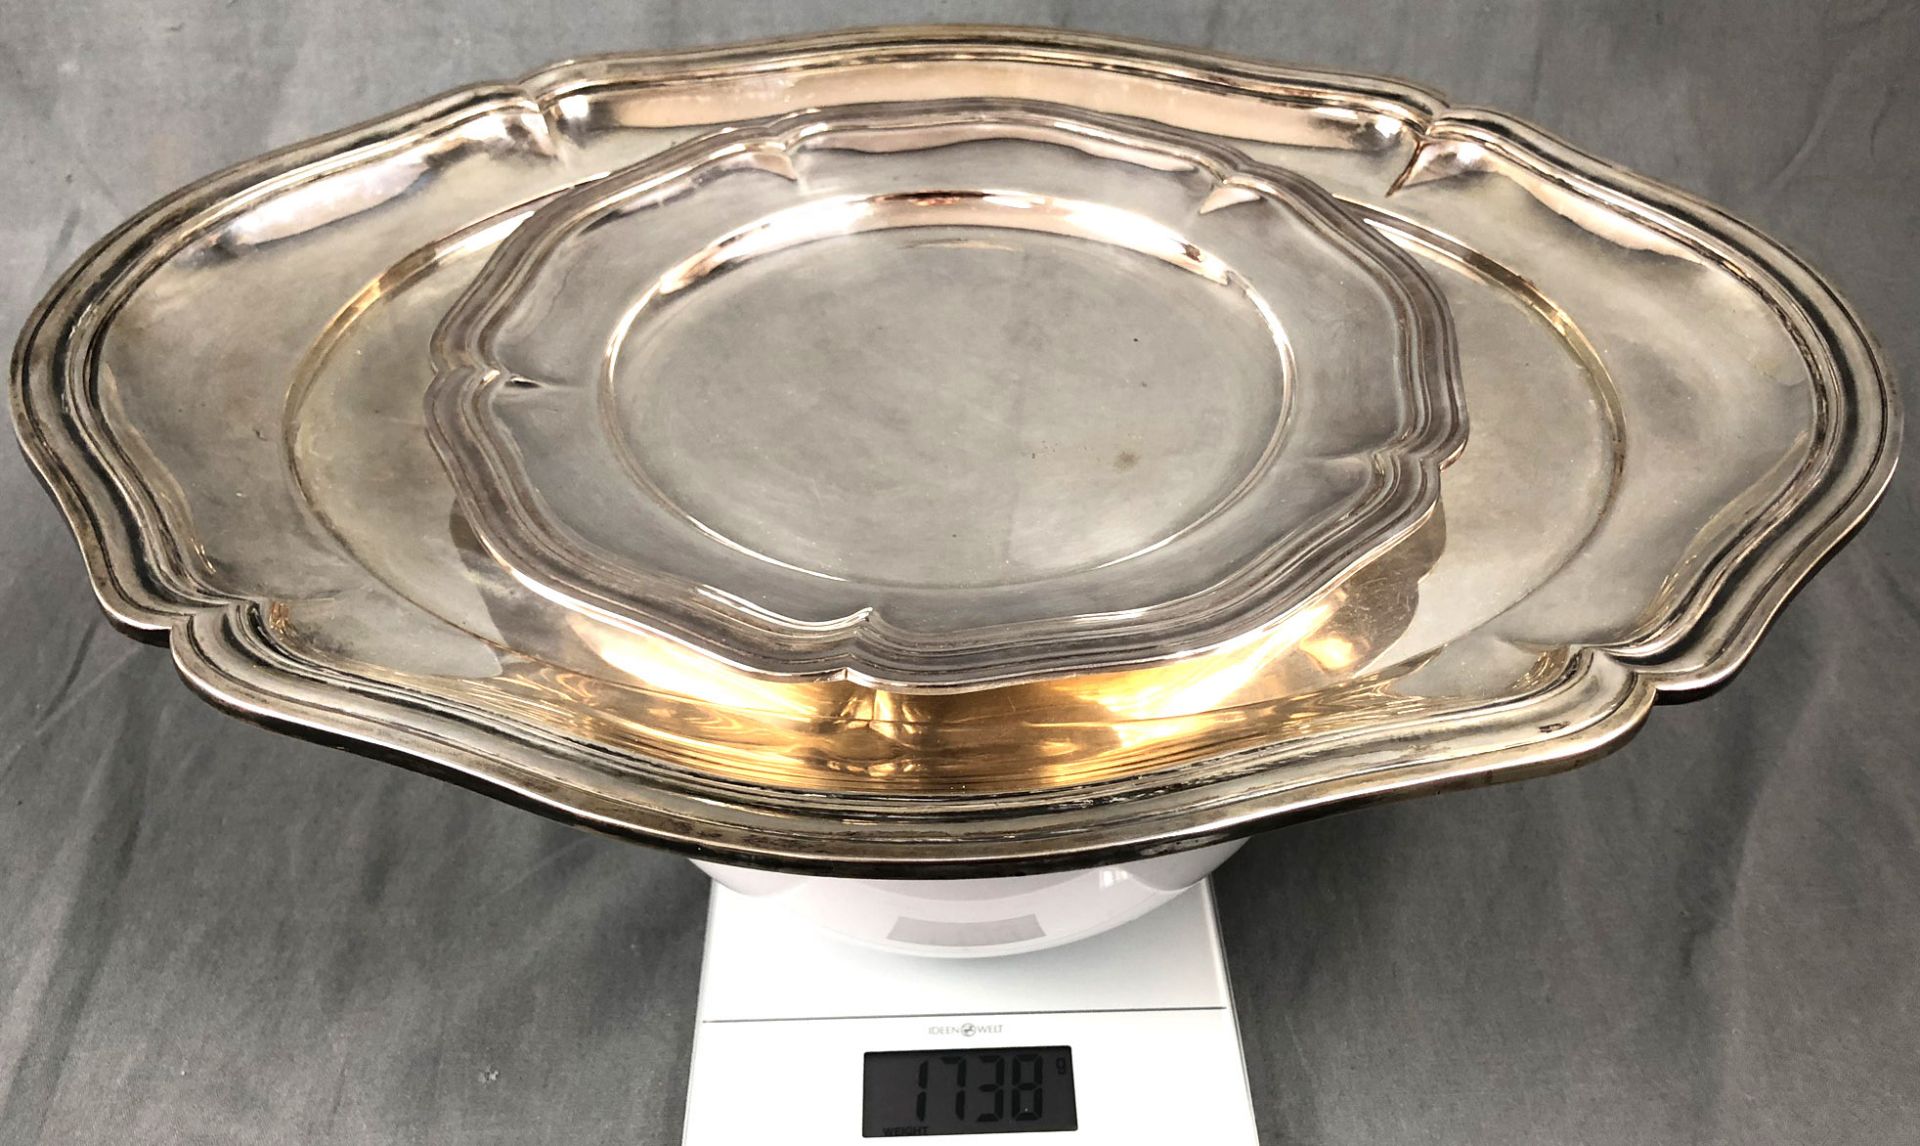 Large serving plate silver 835 and a plate silver 830.1738 grams. Up to 48.5 cm x 37.5 cm. - Bild 5 aus 5